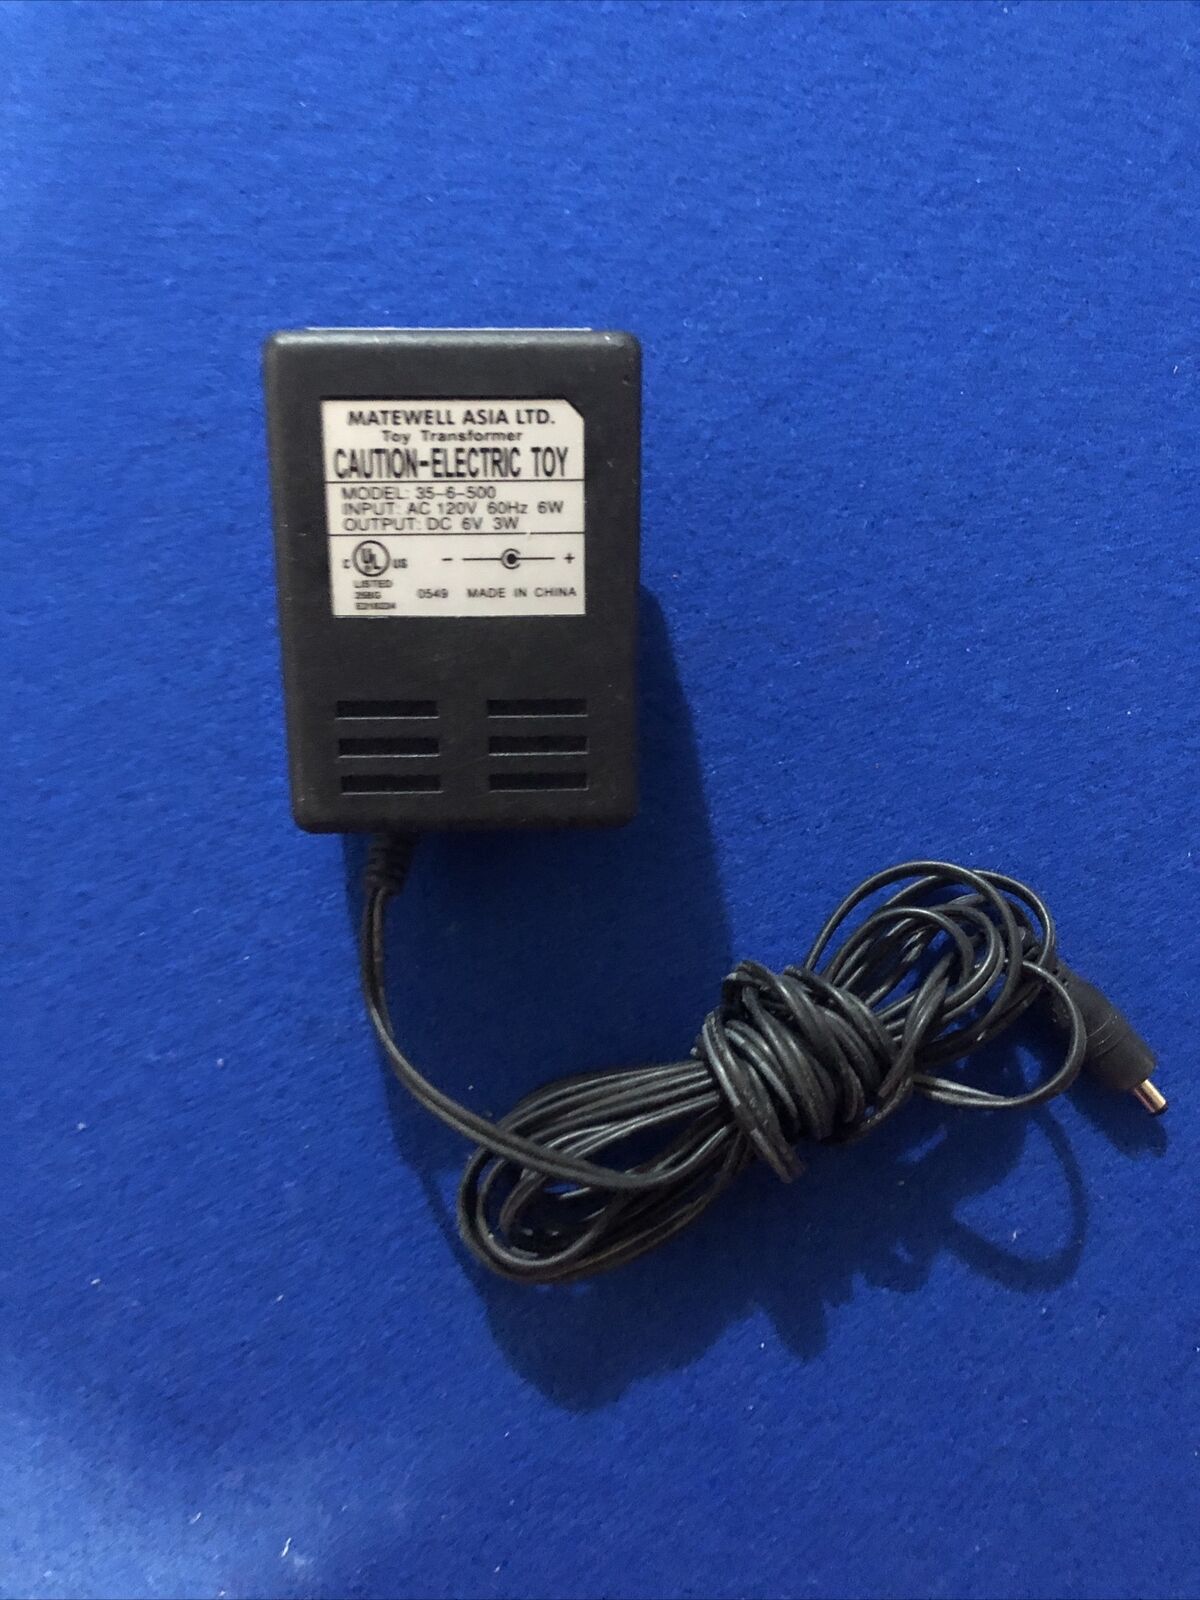 Matewell Toy Transformer 6V AC Power Adapter 35-6-500 for PDA Palm Pilot m505 Brand: Matewell Compatible Brand: Pal